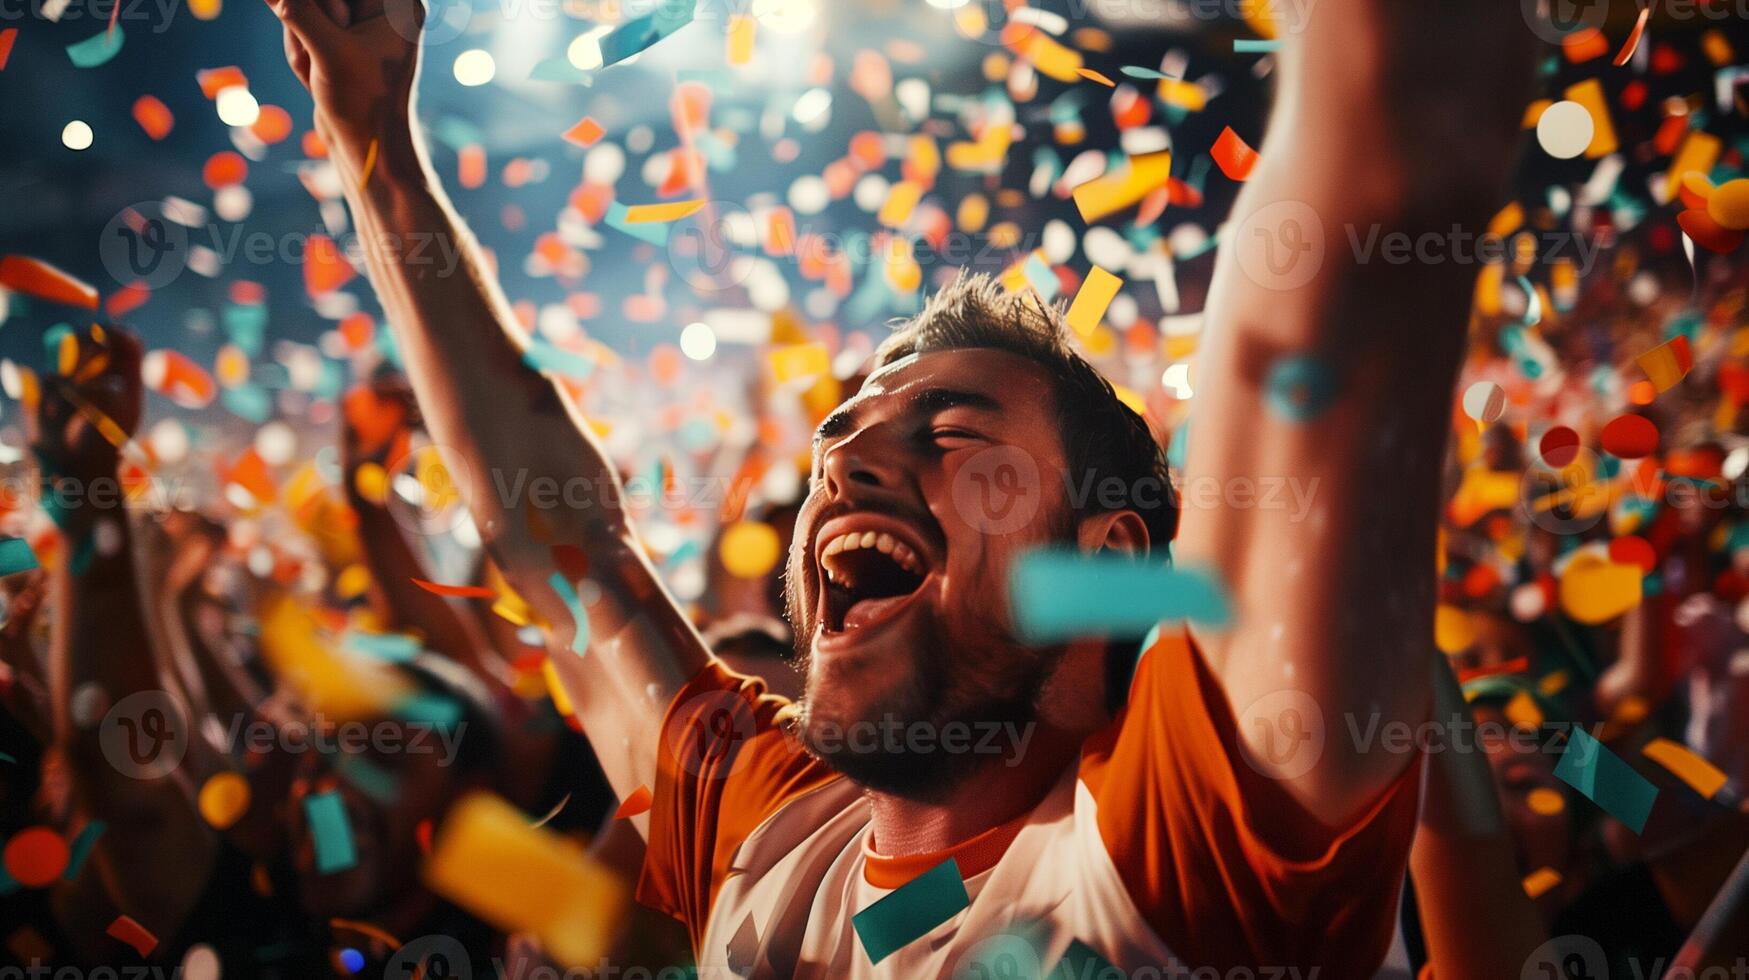 Joyful young man celebrating with raised arms in a colorful confetti rain at a festive event, evoking feelings of happiness and victory, possibly New Years Eve or a sports victory photo